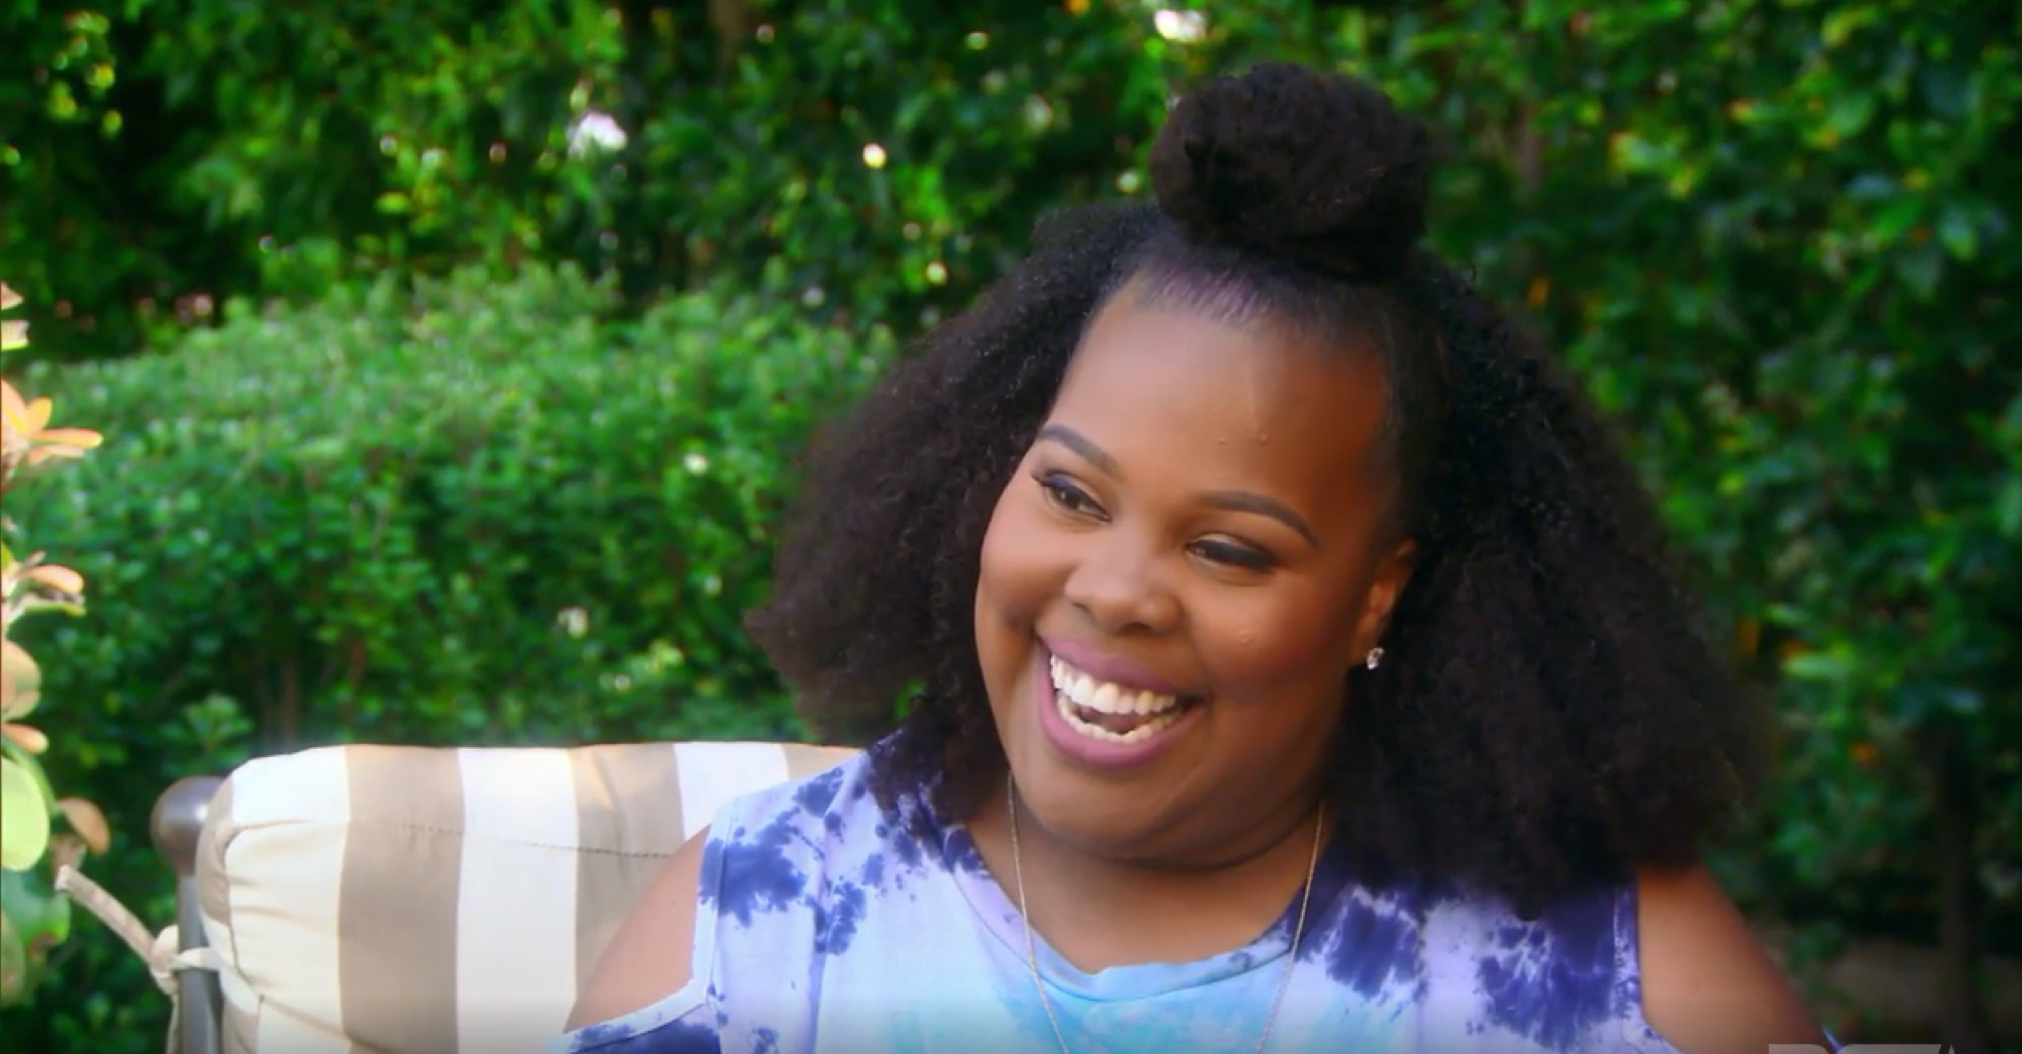 EXCLUSIVE: Catch a Sneak Peek of Actress Amber Riley on 'Curvy Style' With Timonthy Snell
